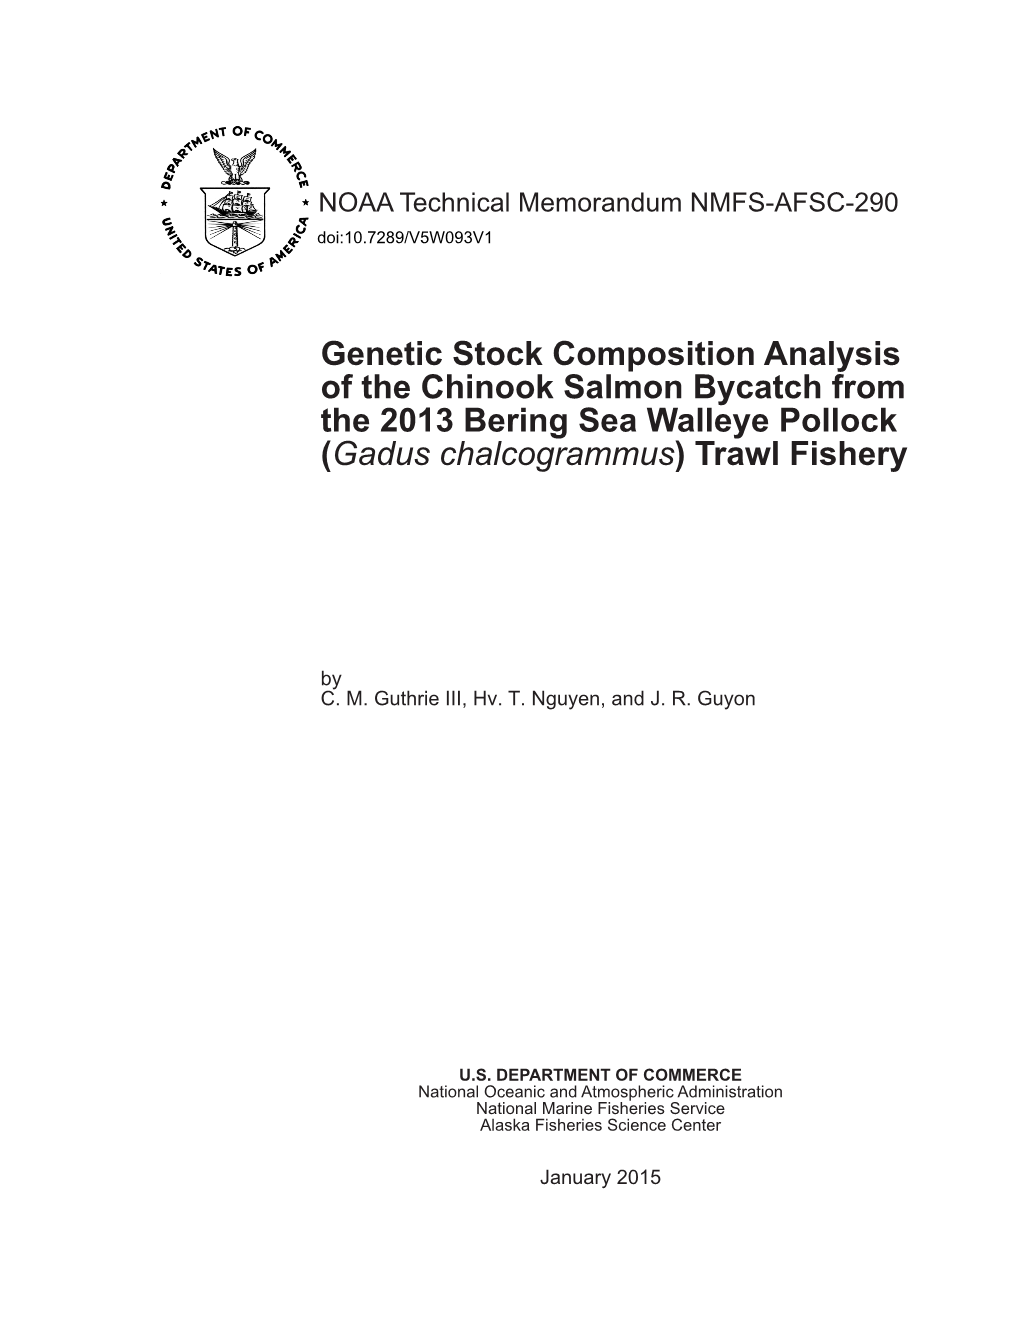 Genetic Stock Composition Analysis of the Chinook Salmon Bycatch from the 2013 Bering Sea Walleye Pollock (Gadus Chalcogrammus) Trawl Fishery